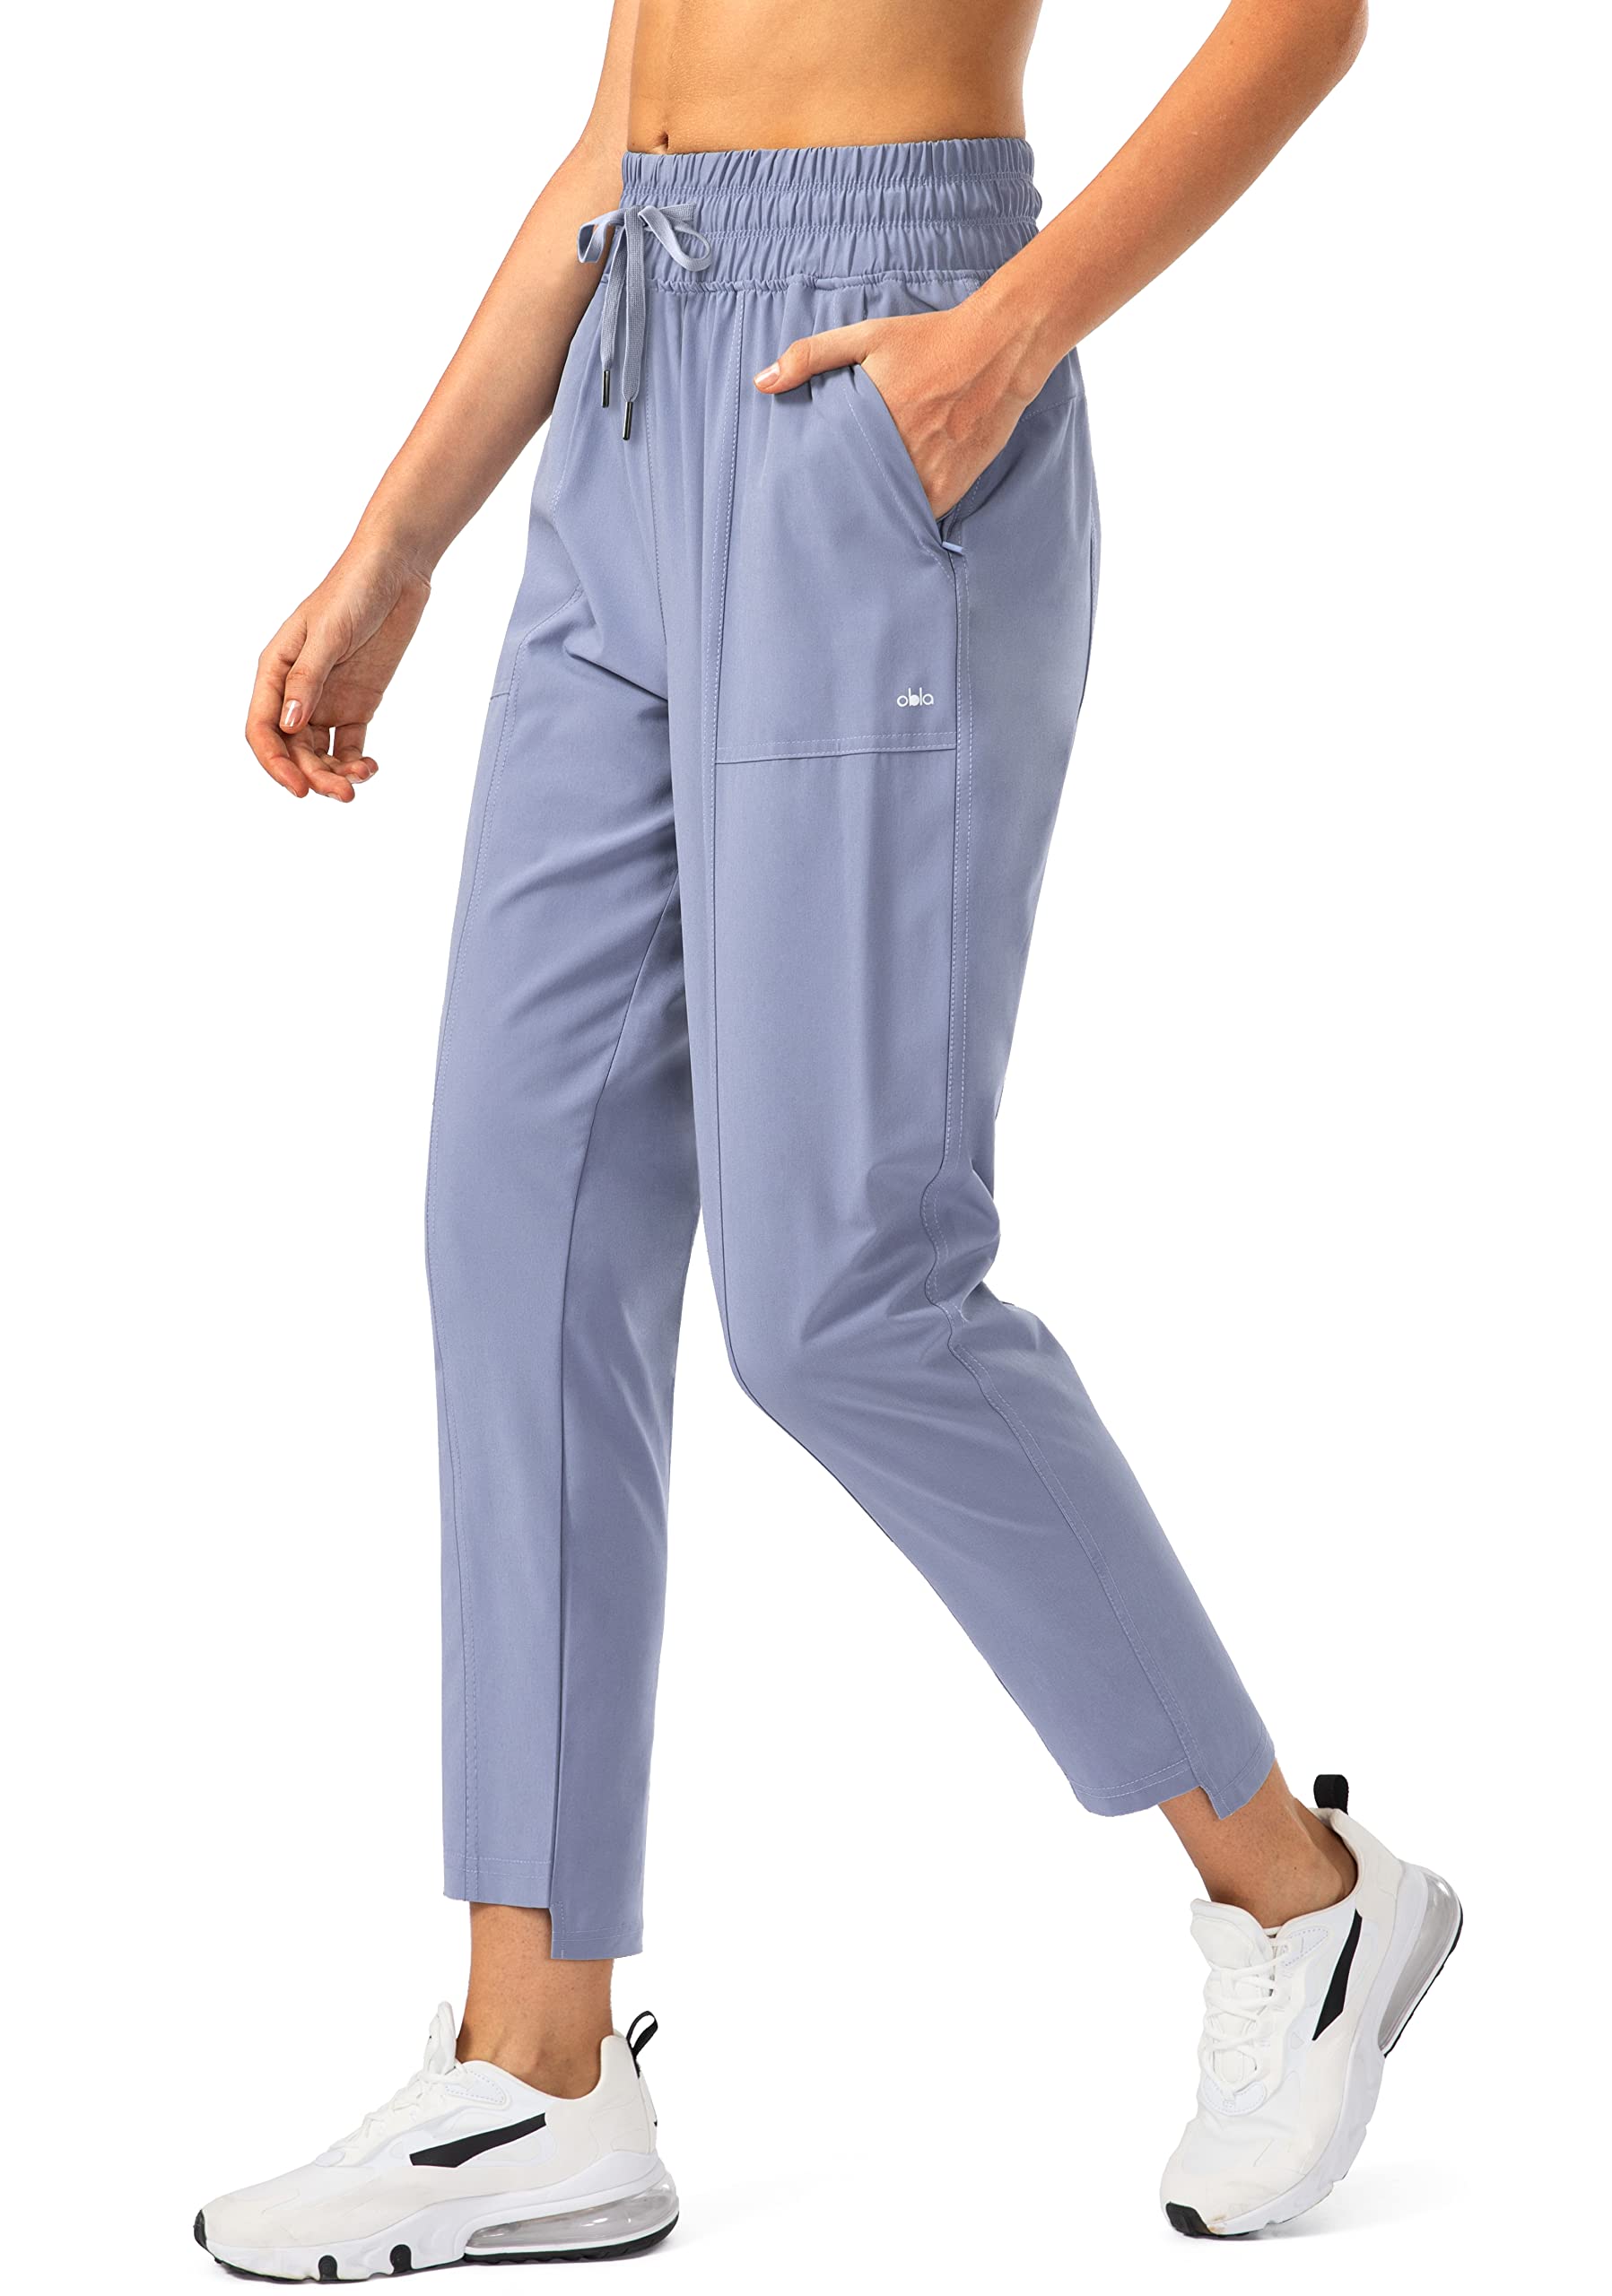 Obla Women's Lightweight Golf Pants with Zipper Pockets High Waisted Casual  Track Work Ankle Pants for Women Light Blue Small